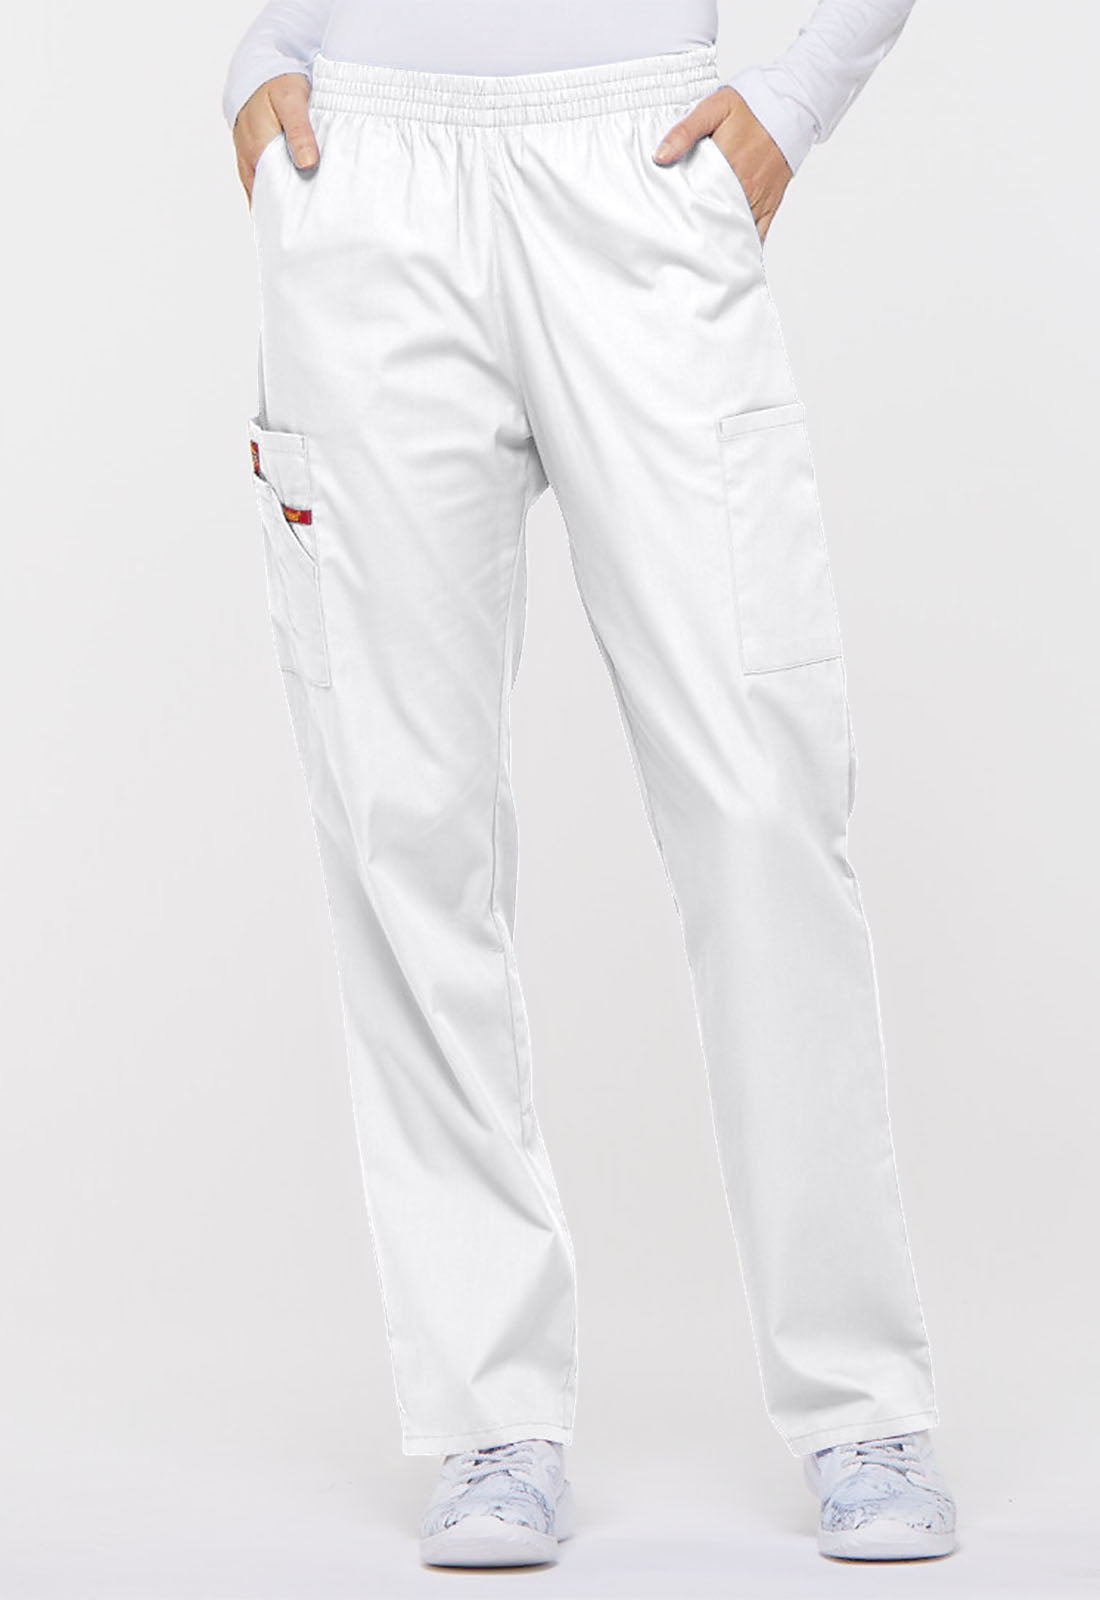 Exist. Conjunto Mujer Dickies EDS Signature Mod.86806/86106 White